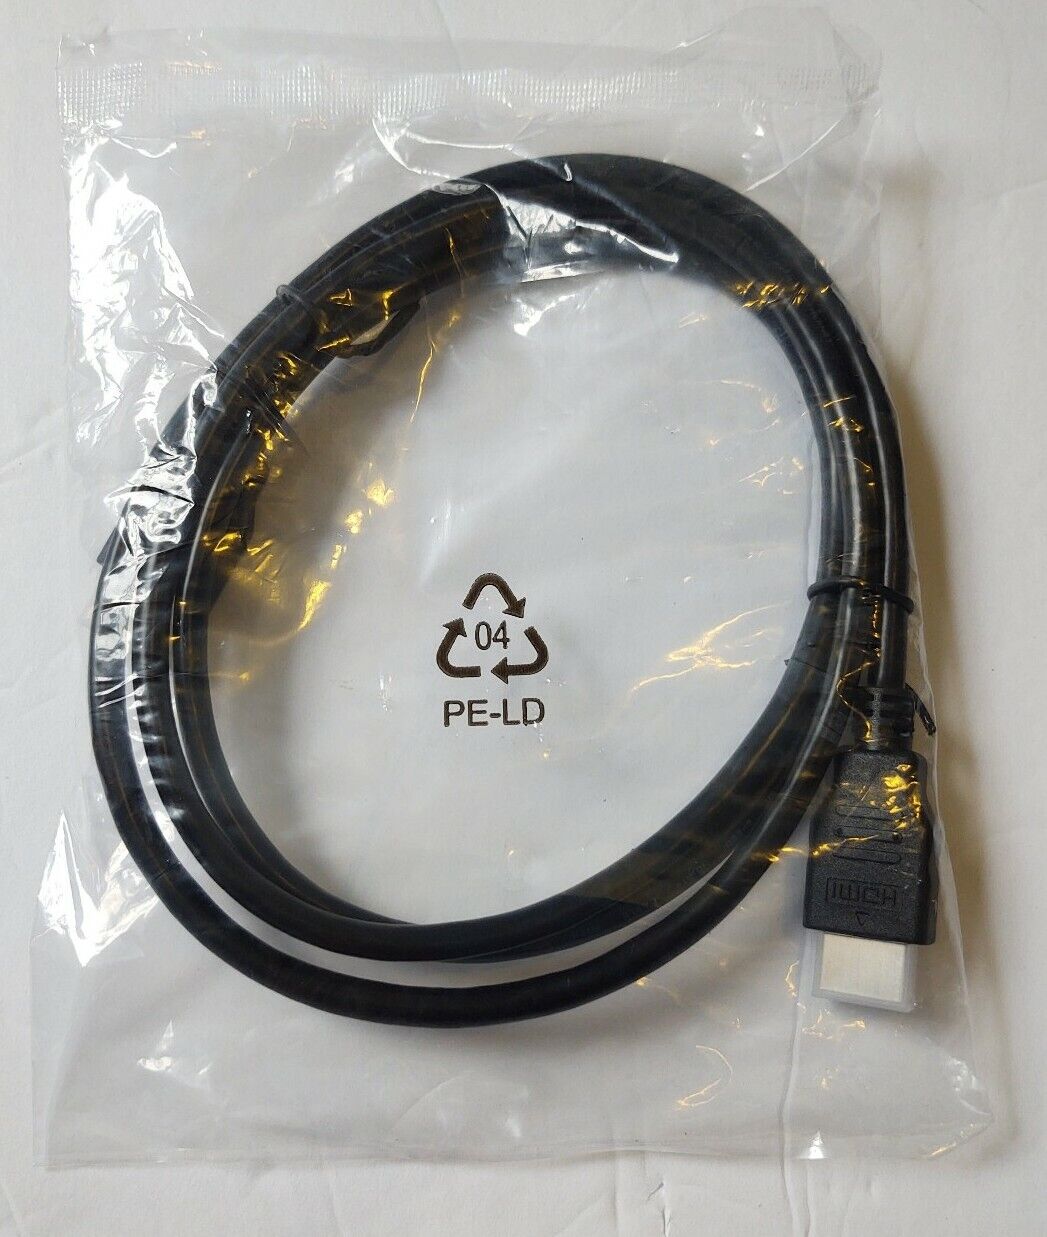 Brand New PE-LD 40 HDMI Cable Cord Connector